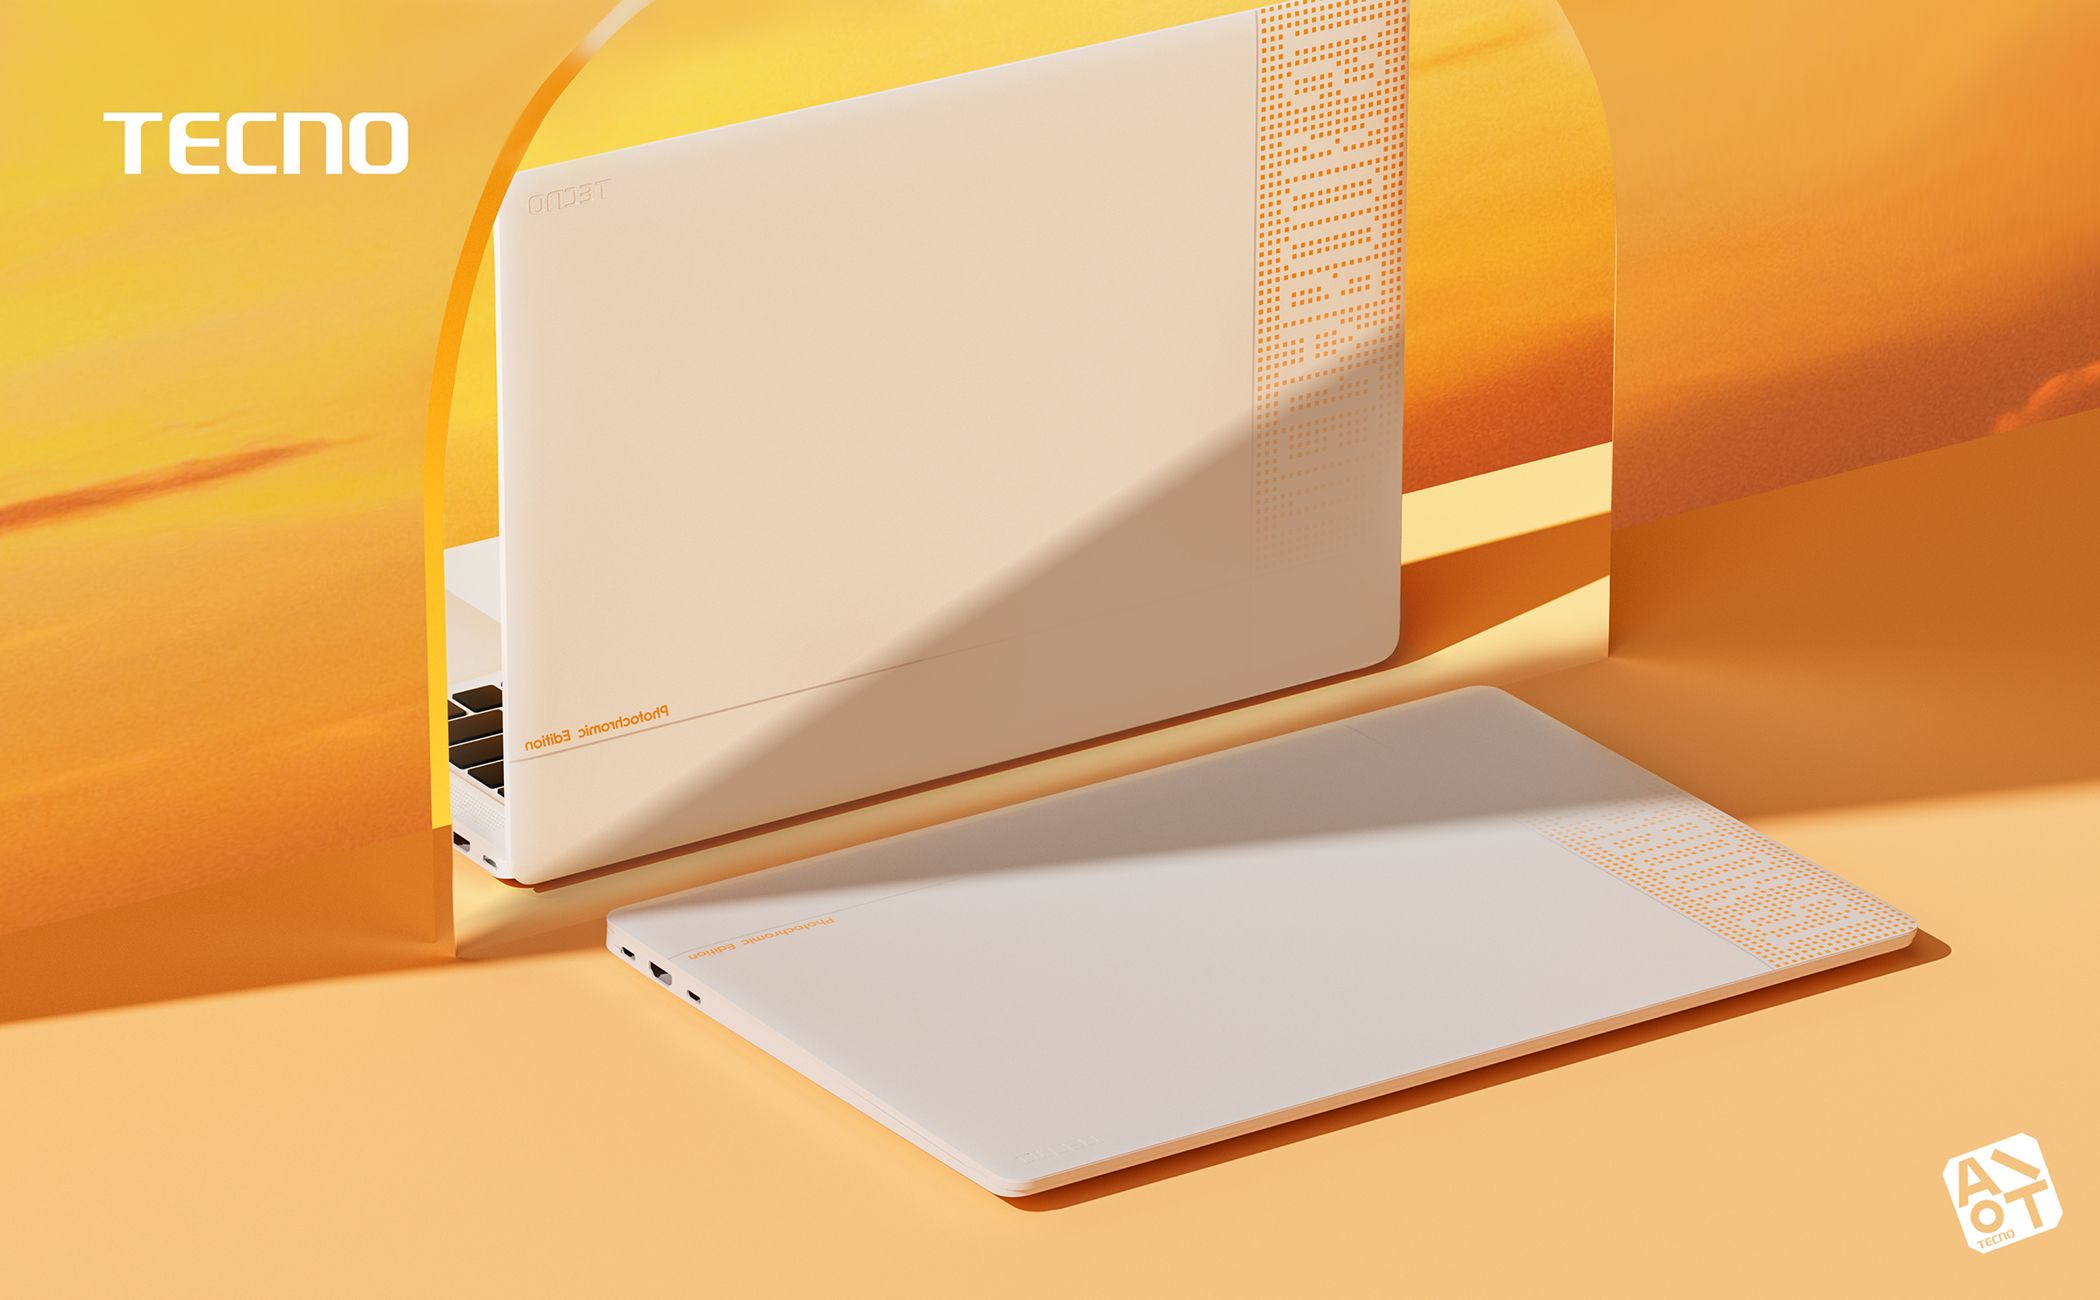 Product shot featuring one open and one closed white laptop